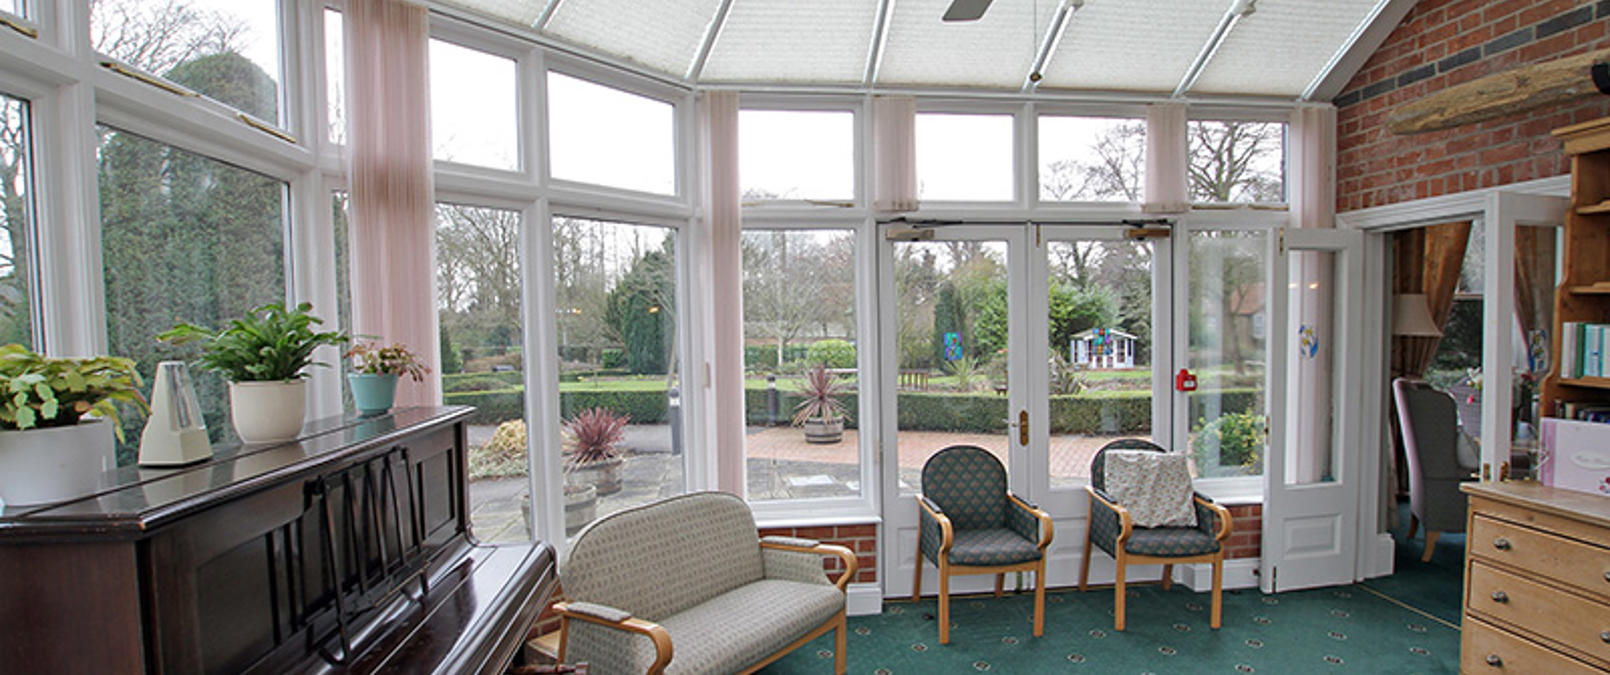 Conservatory Small